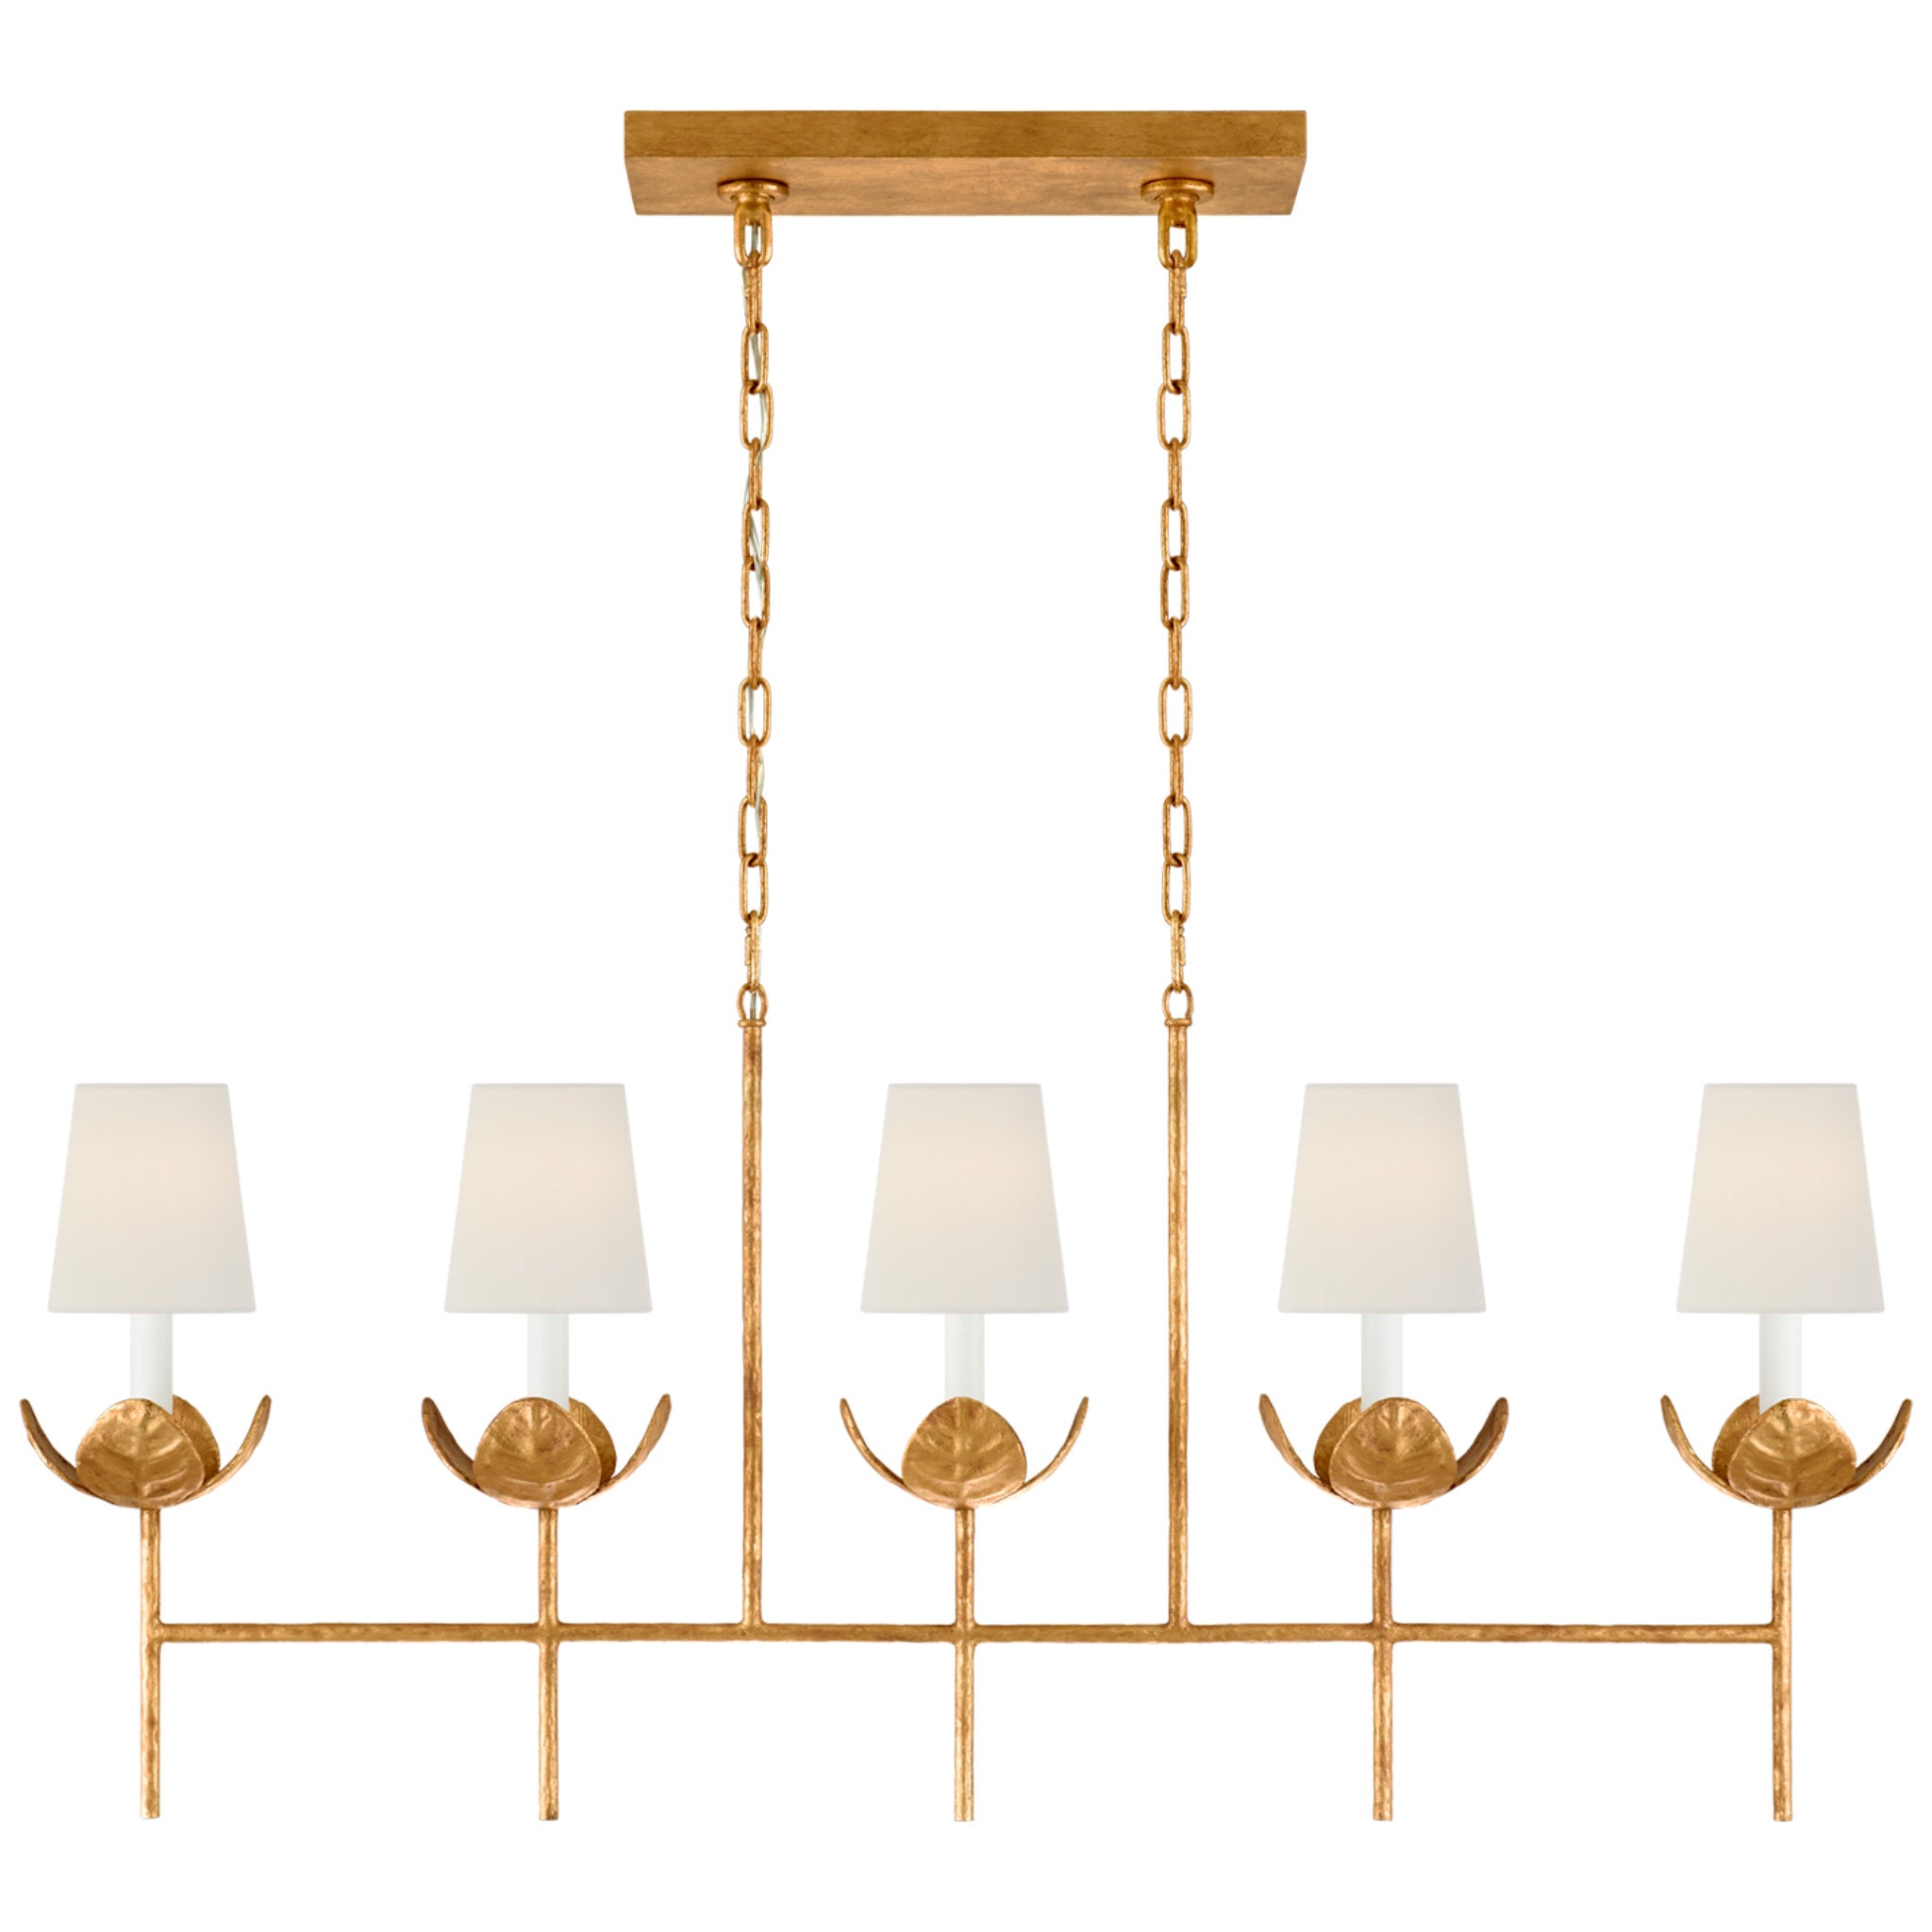 Julie Neill Illana Large Linear Chandelier in Antique Gold Leaf with Linen Shade